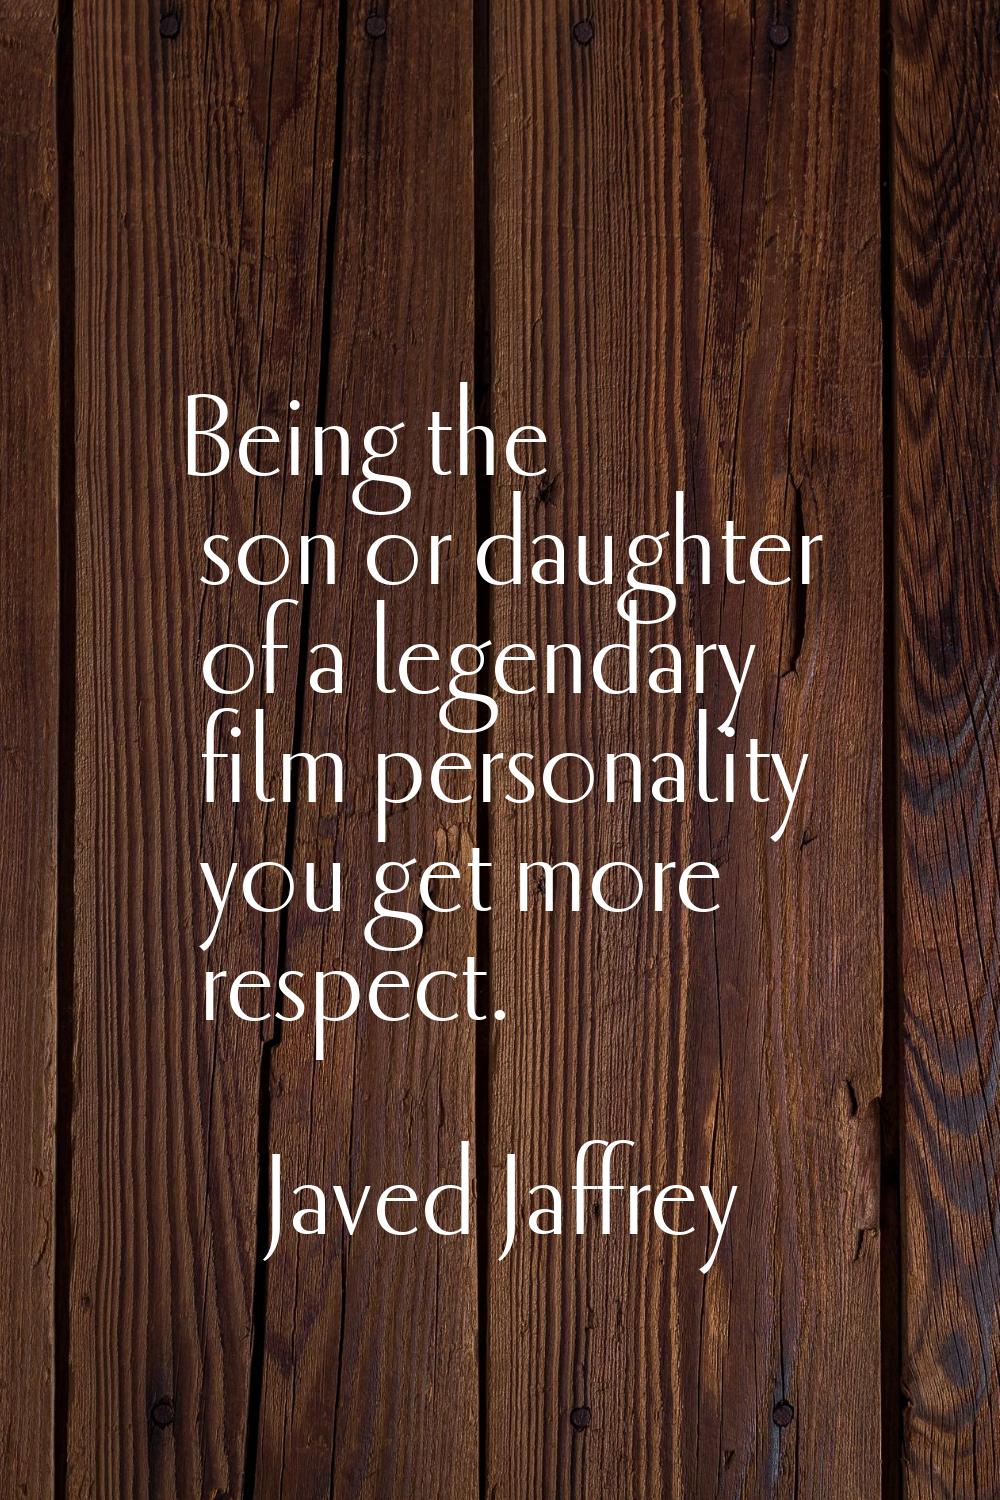 Being the son or daughter of a legendary film personality you get more respect.